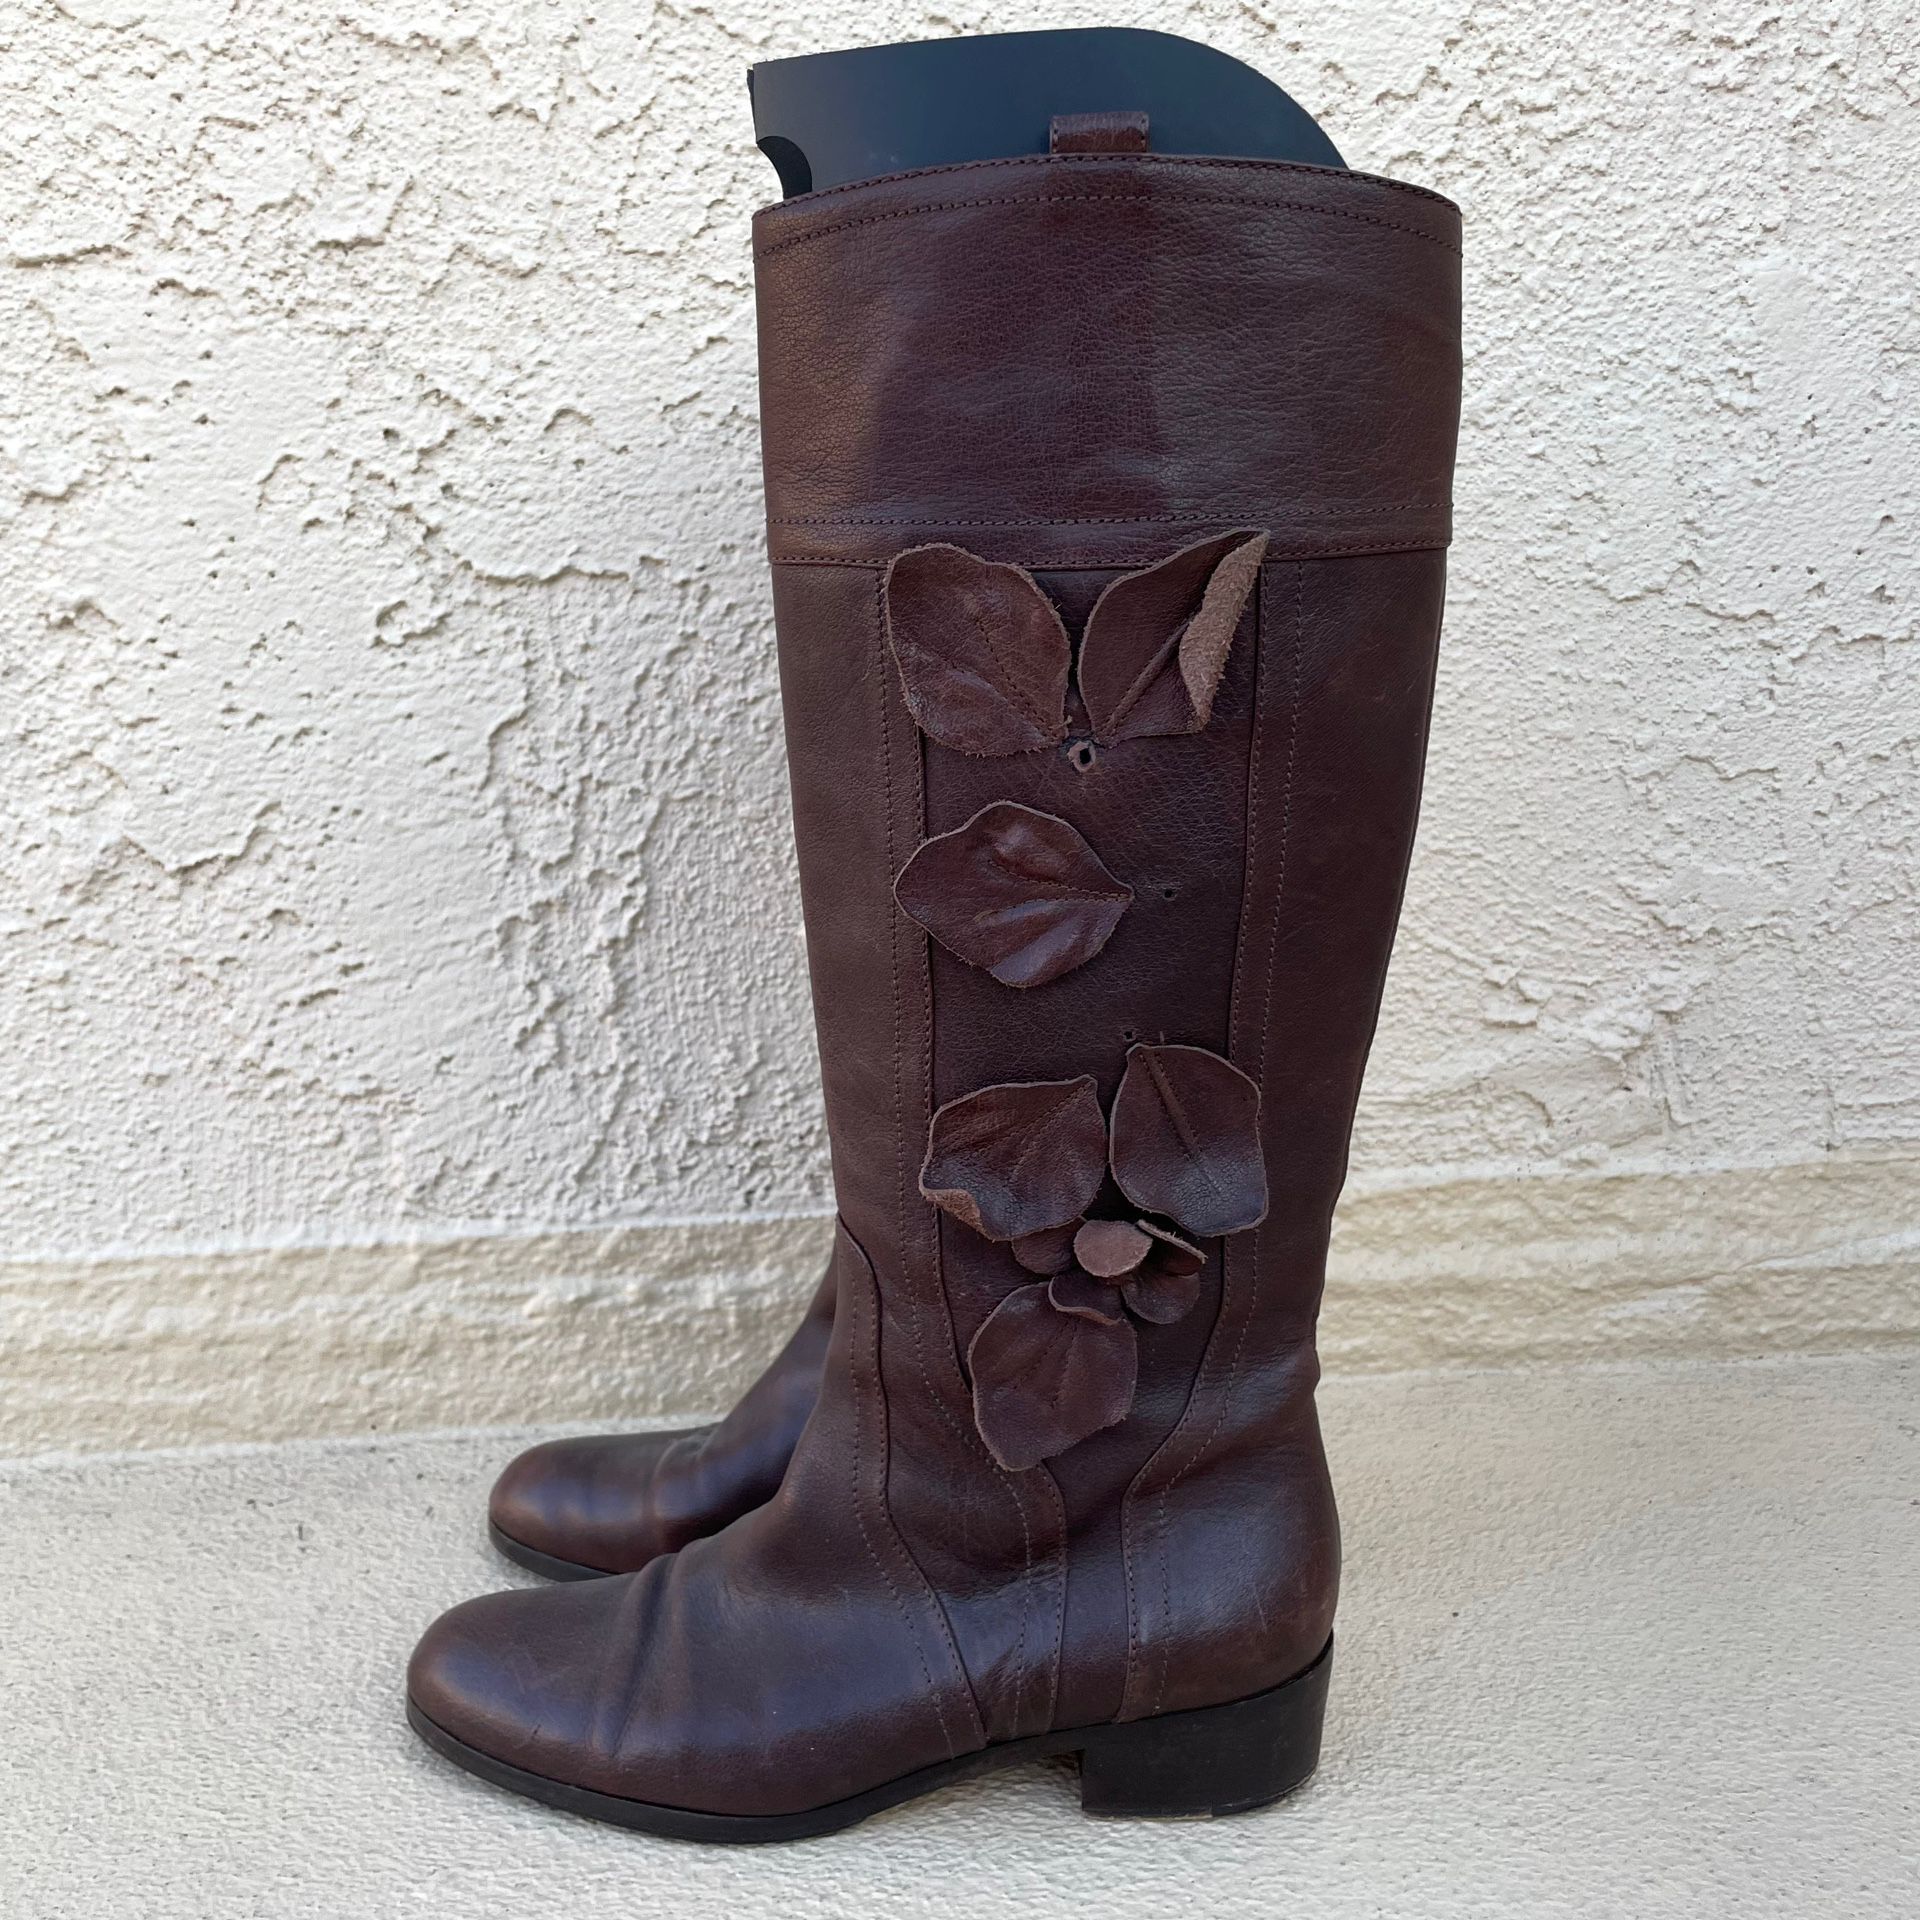 Valentino brown leather floral appliqué knee-high boots size IT 38 US 8 for Sale in Redondo Beach, CA - OfferUp